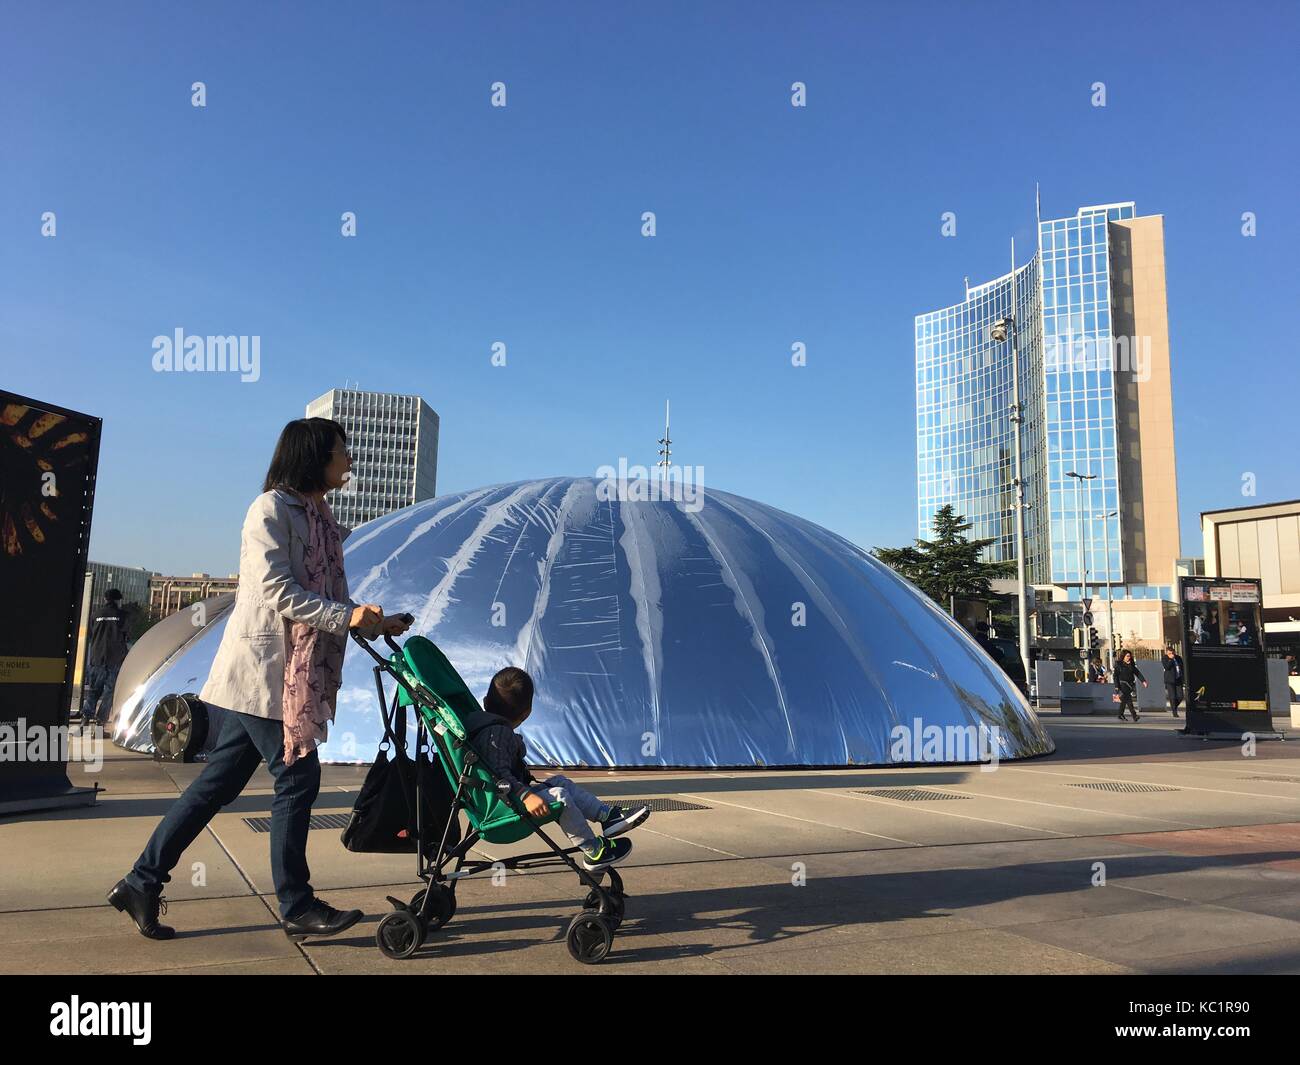 A woman passes a tent in the shape of a large drop of mercury by the Palace of the League of Nations in Geneva, Switzerland, 28 Septmeber 2017. The tent serves the purpose of warning about the health risks of the highly toxic heavy metal. The mercury drop was realiyed in cooperation with the secretary of the Minamata Convention on Mercury and the network of Plastique Fantastique, based in Berlin. The focus of the Minamata Convention on Mercury is reducing the emission of mercury. Photo: Christiane Oelrich/dpa Stock Photo